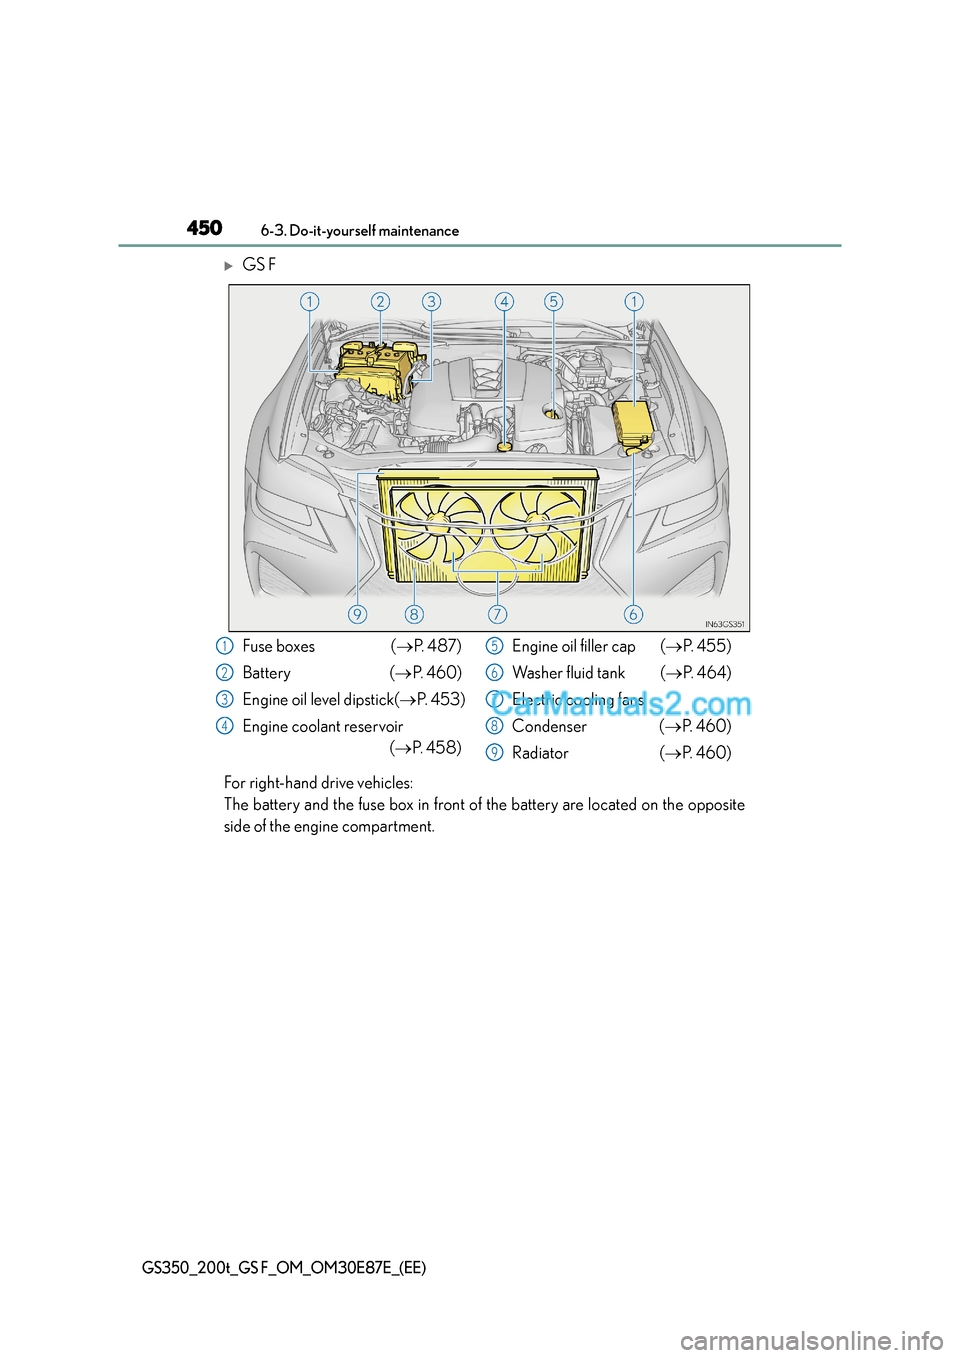 Lexus GS200t 2015  Owners Manual 4506-3. Do-it-yourself maintenance
GS350_200t_GS F_OM_OM30E87E_(EE)
�XGS F
For right-hand drive vehicles: 
The battery and the fuse box in front of the battery are located on the opposite
side of the 